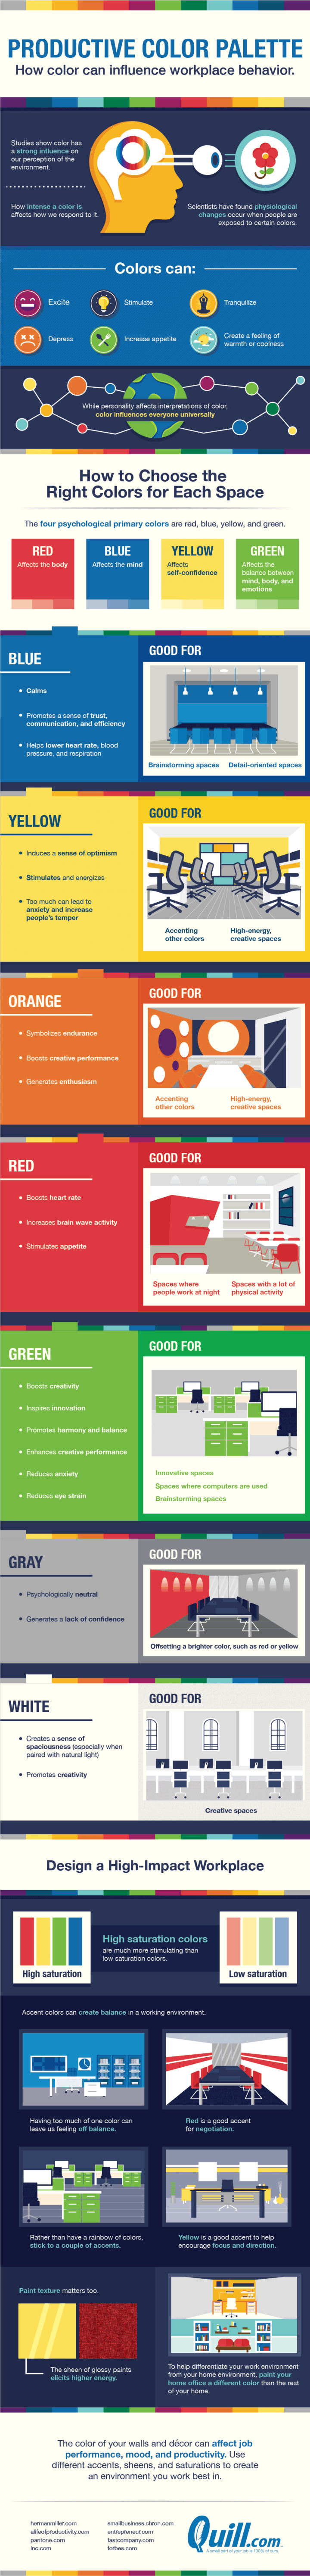 Productive color palettes for office or workplace